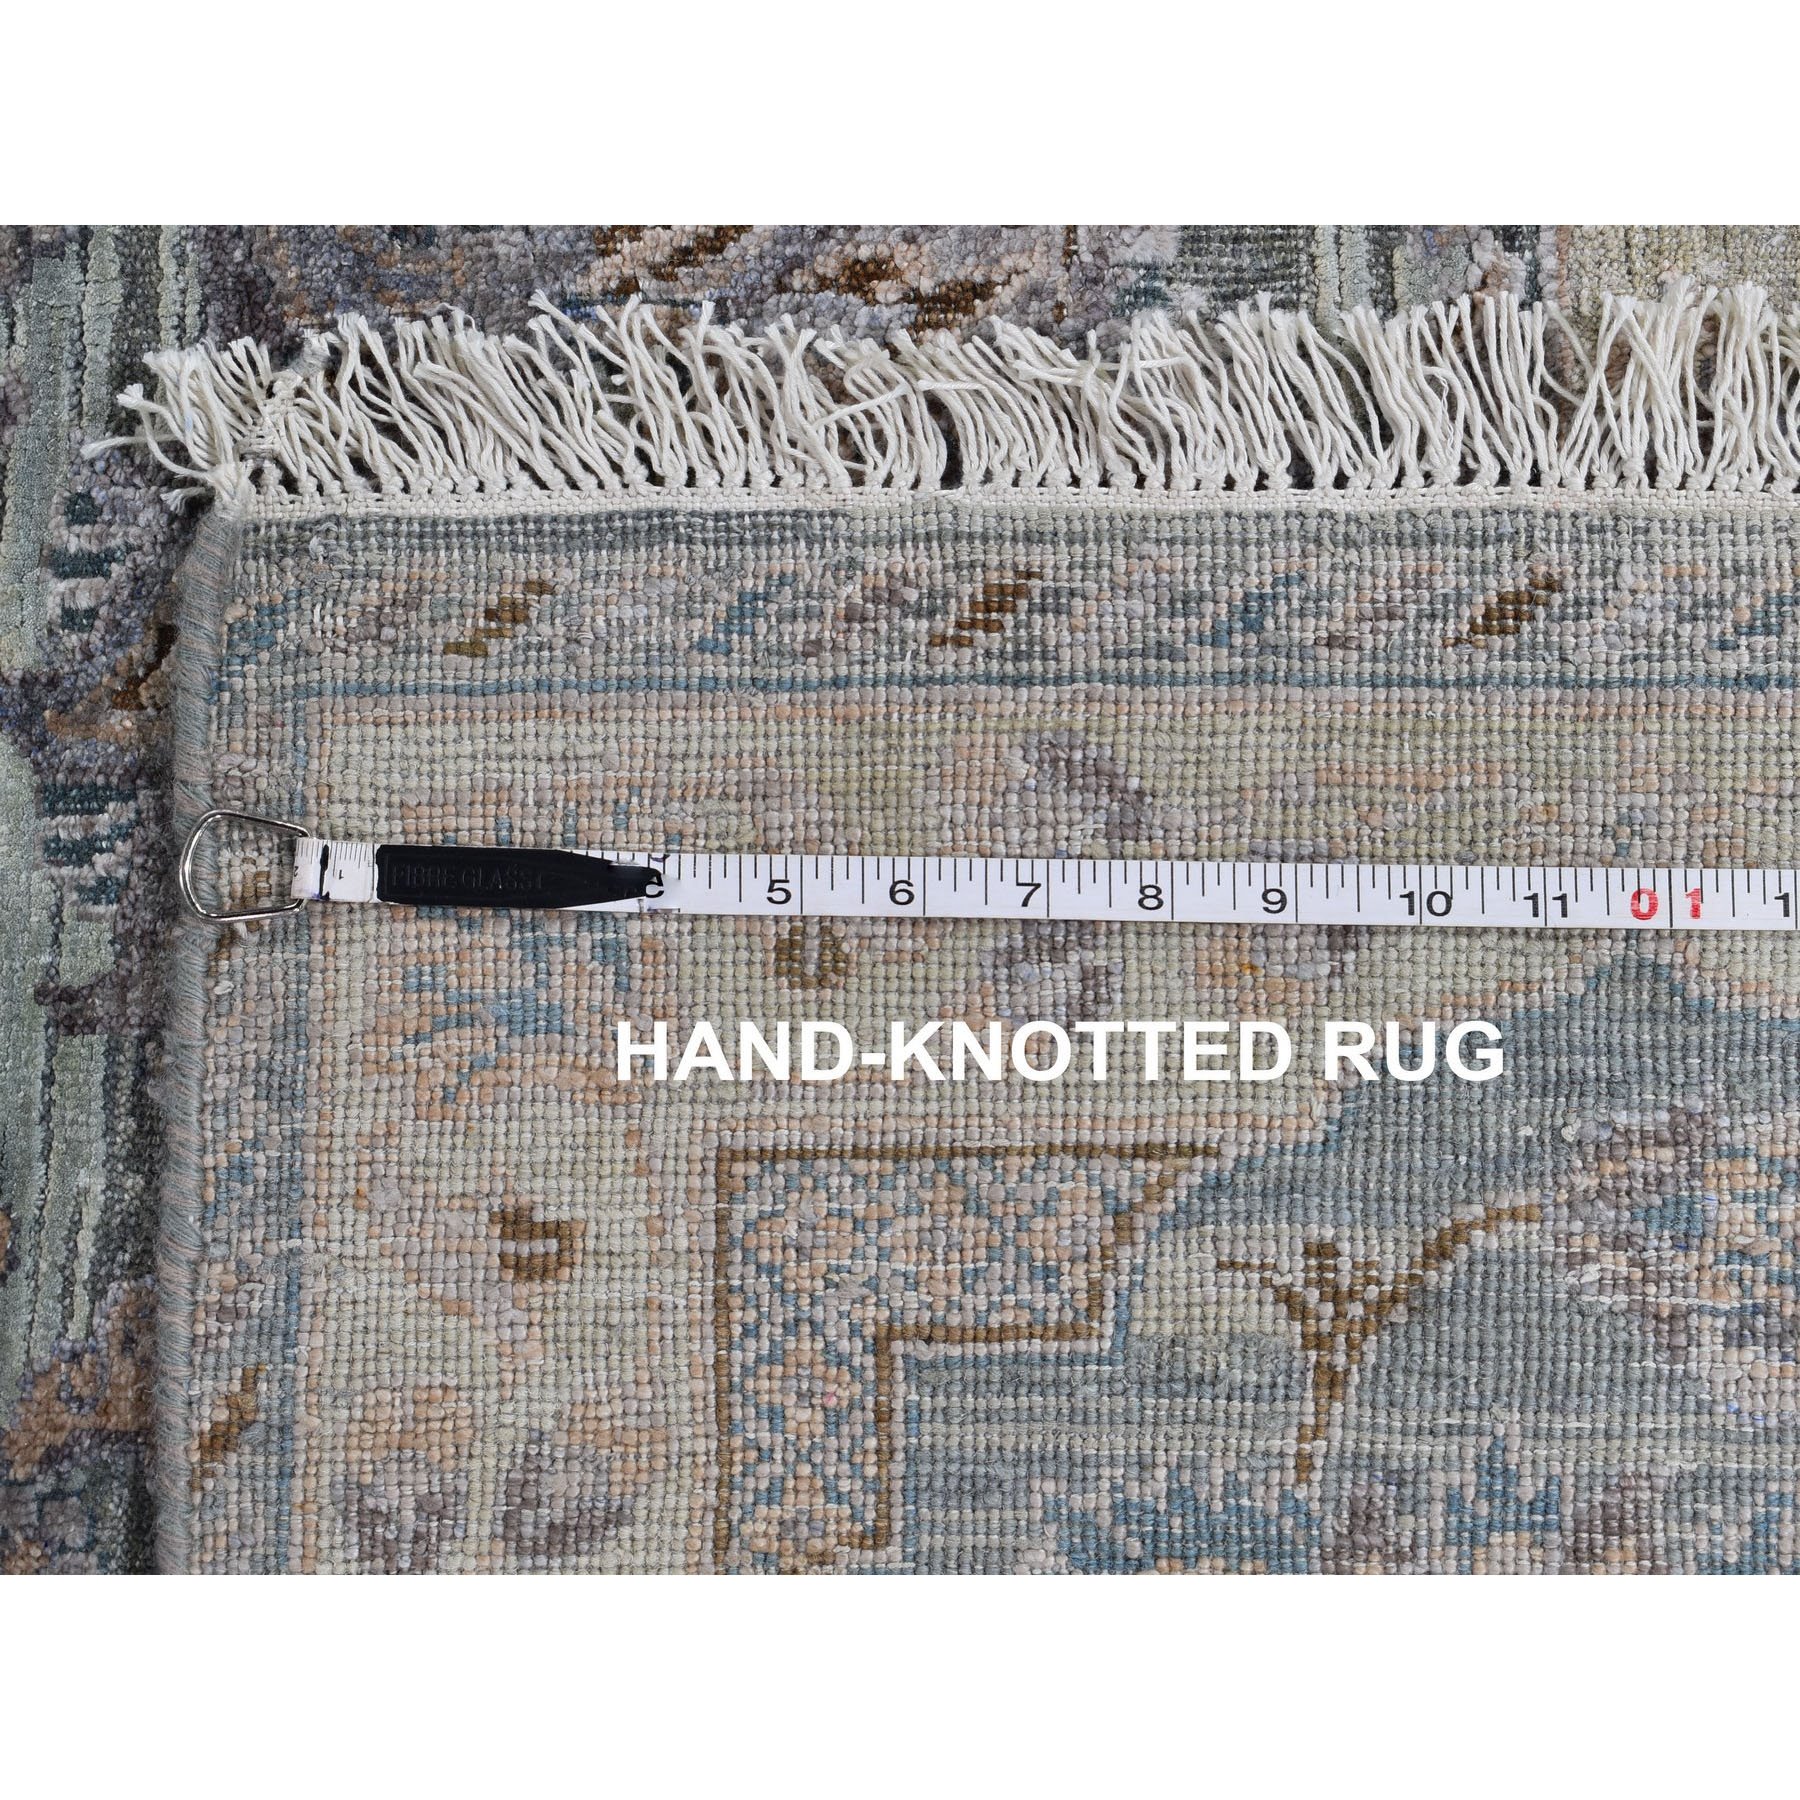 8-1 x10- Light Green Pure Silk With Textured Wool Mughal Design Hand Knotted Oriental Rug 